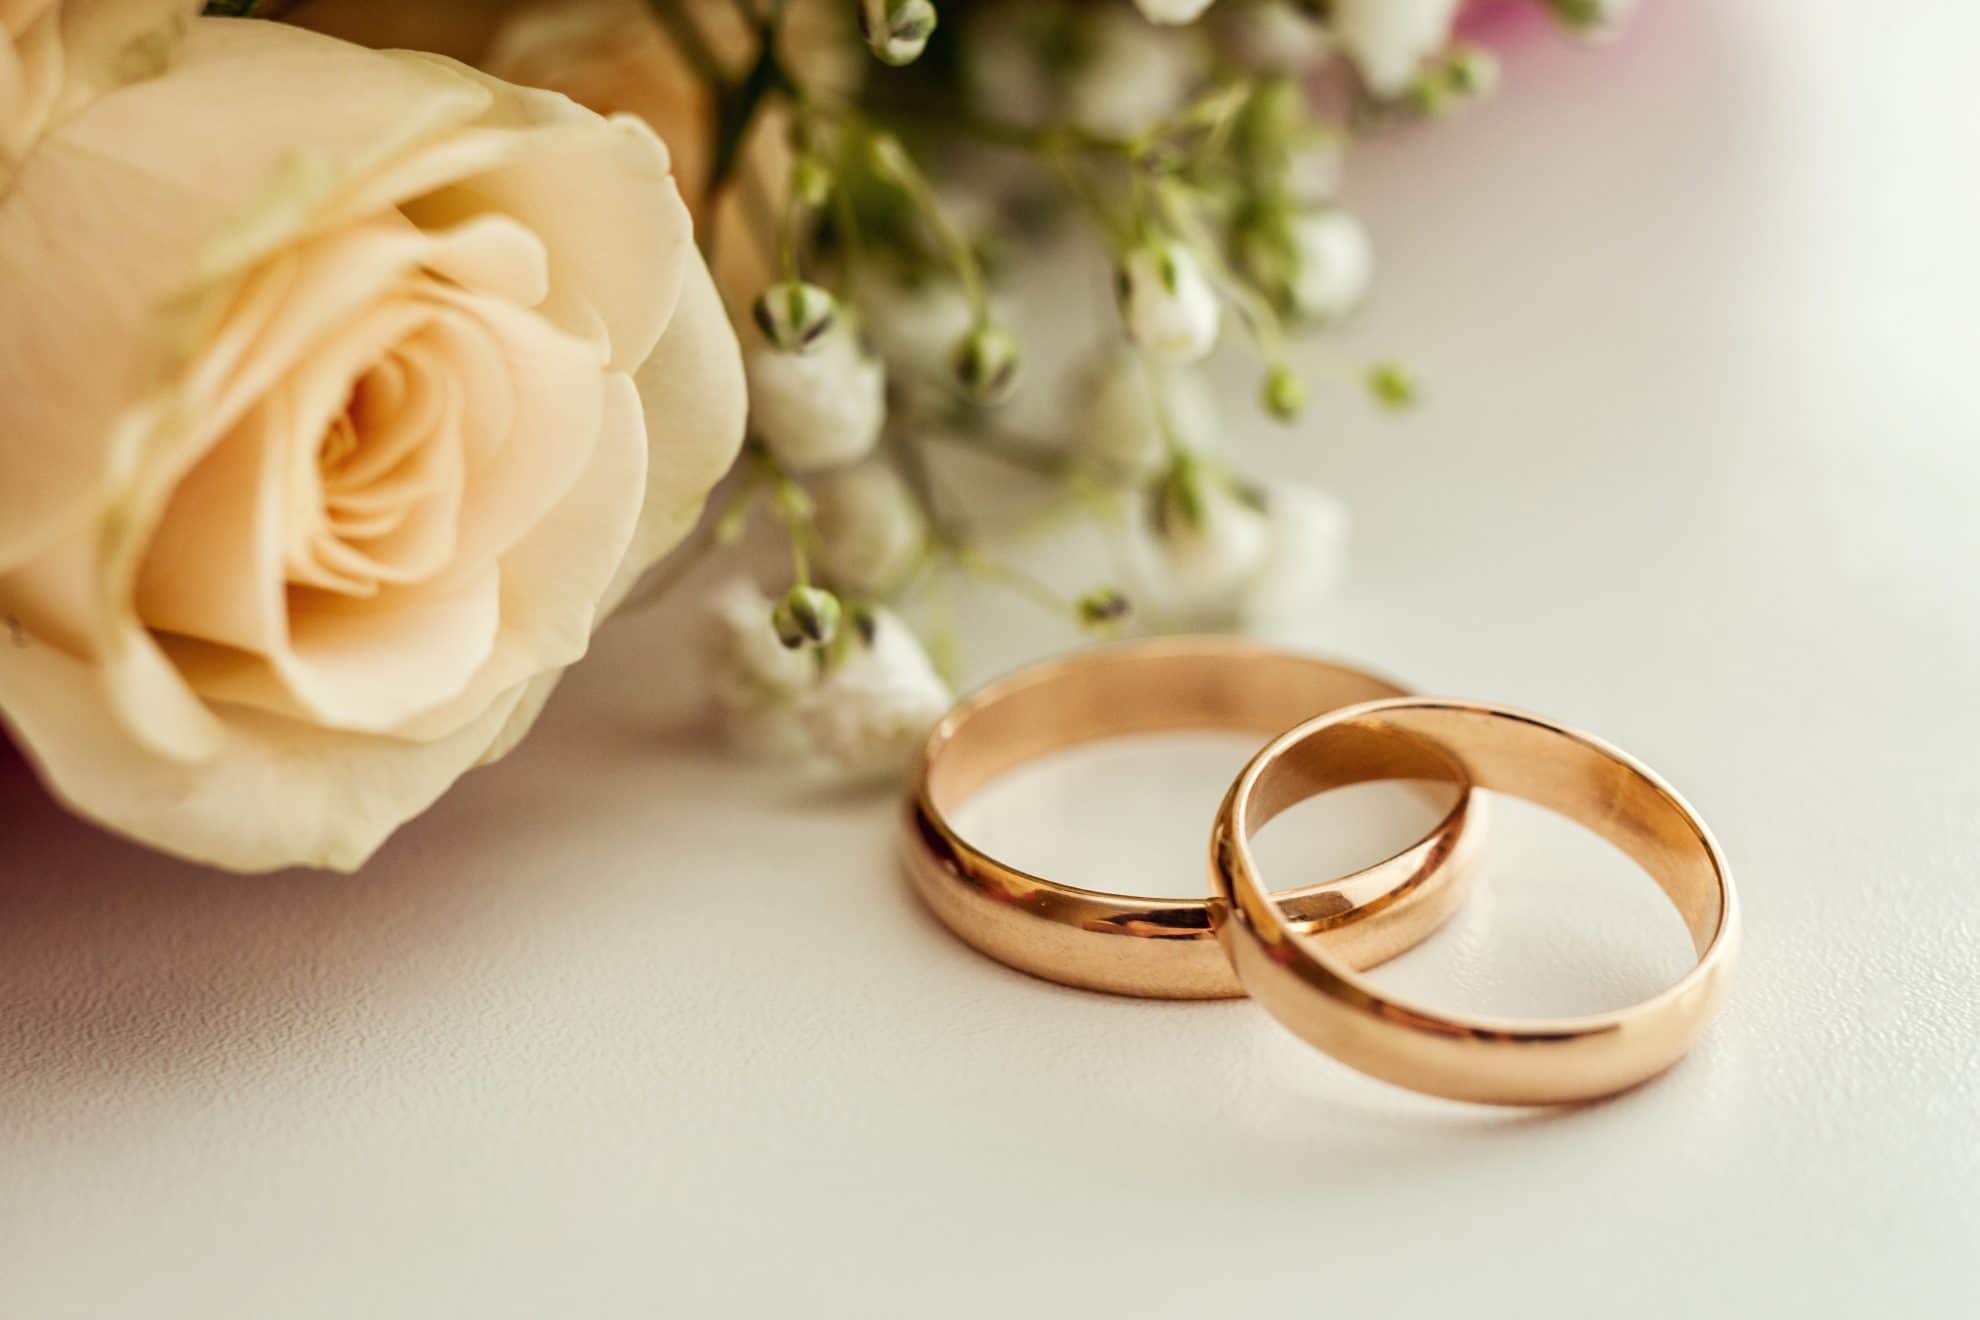 Two gold wedding rings sit on a table with a white rose beside them.